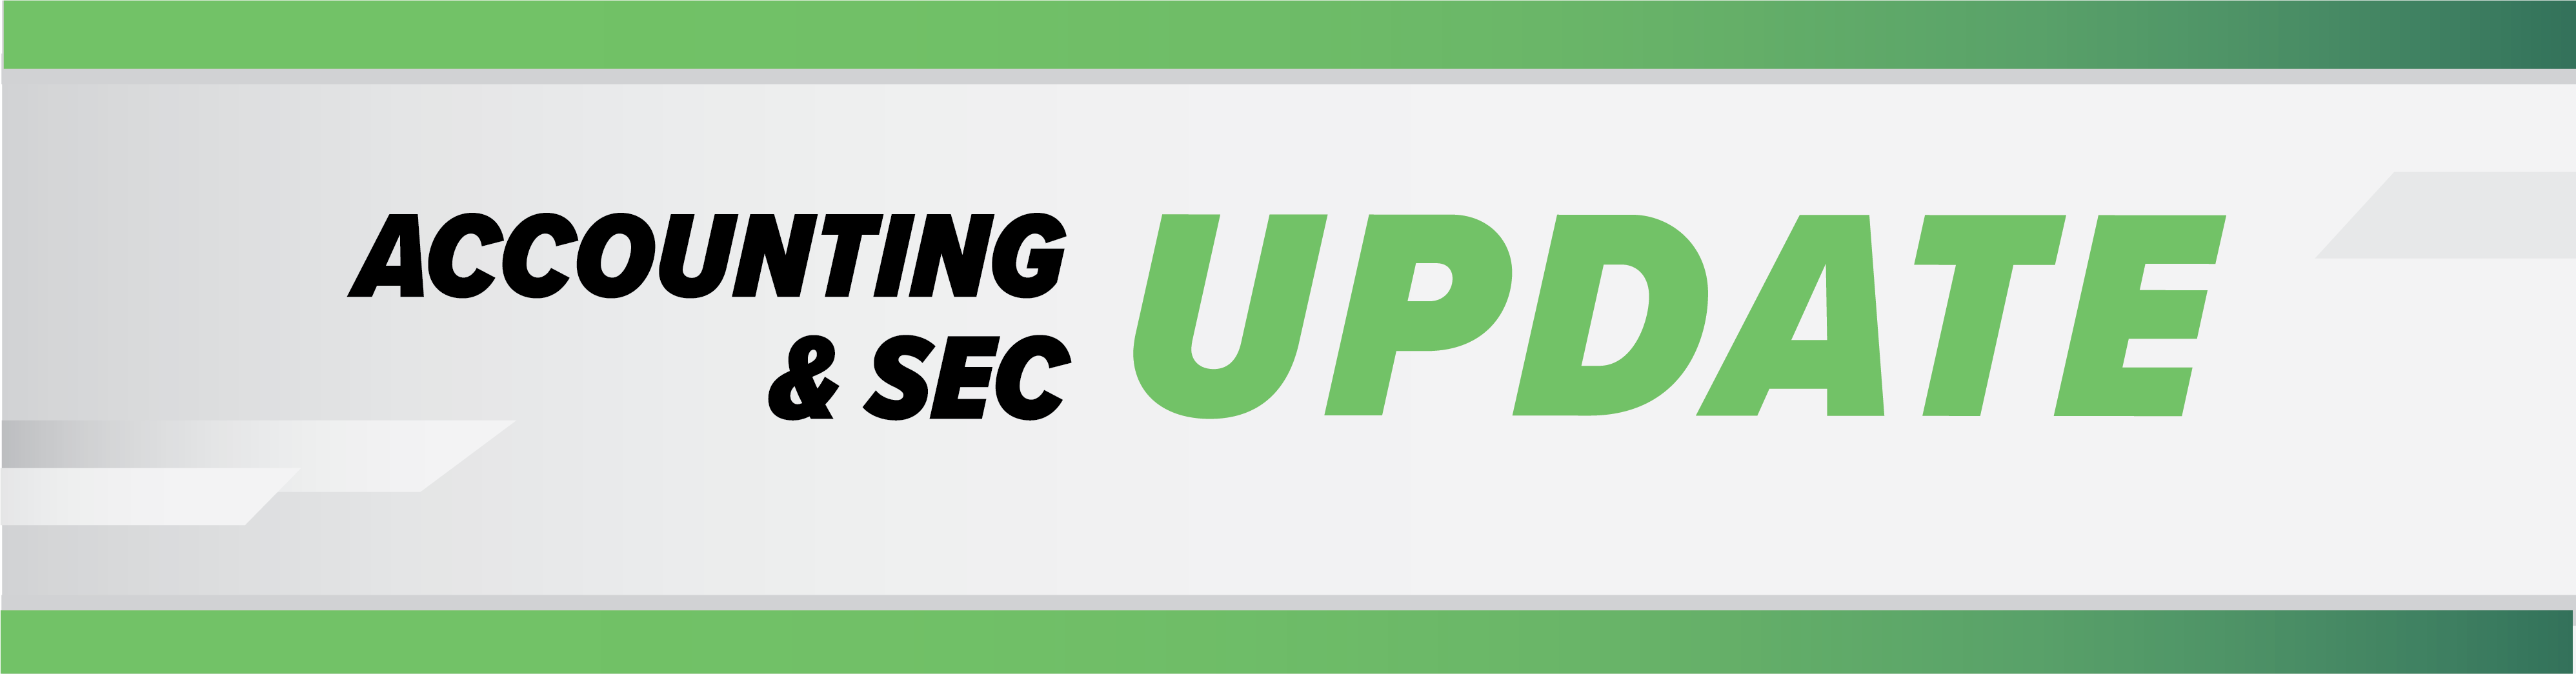 Accounting and SEC Update Banner